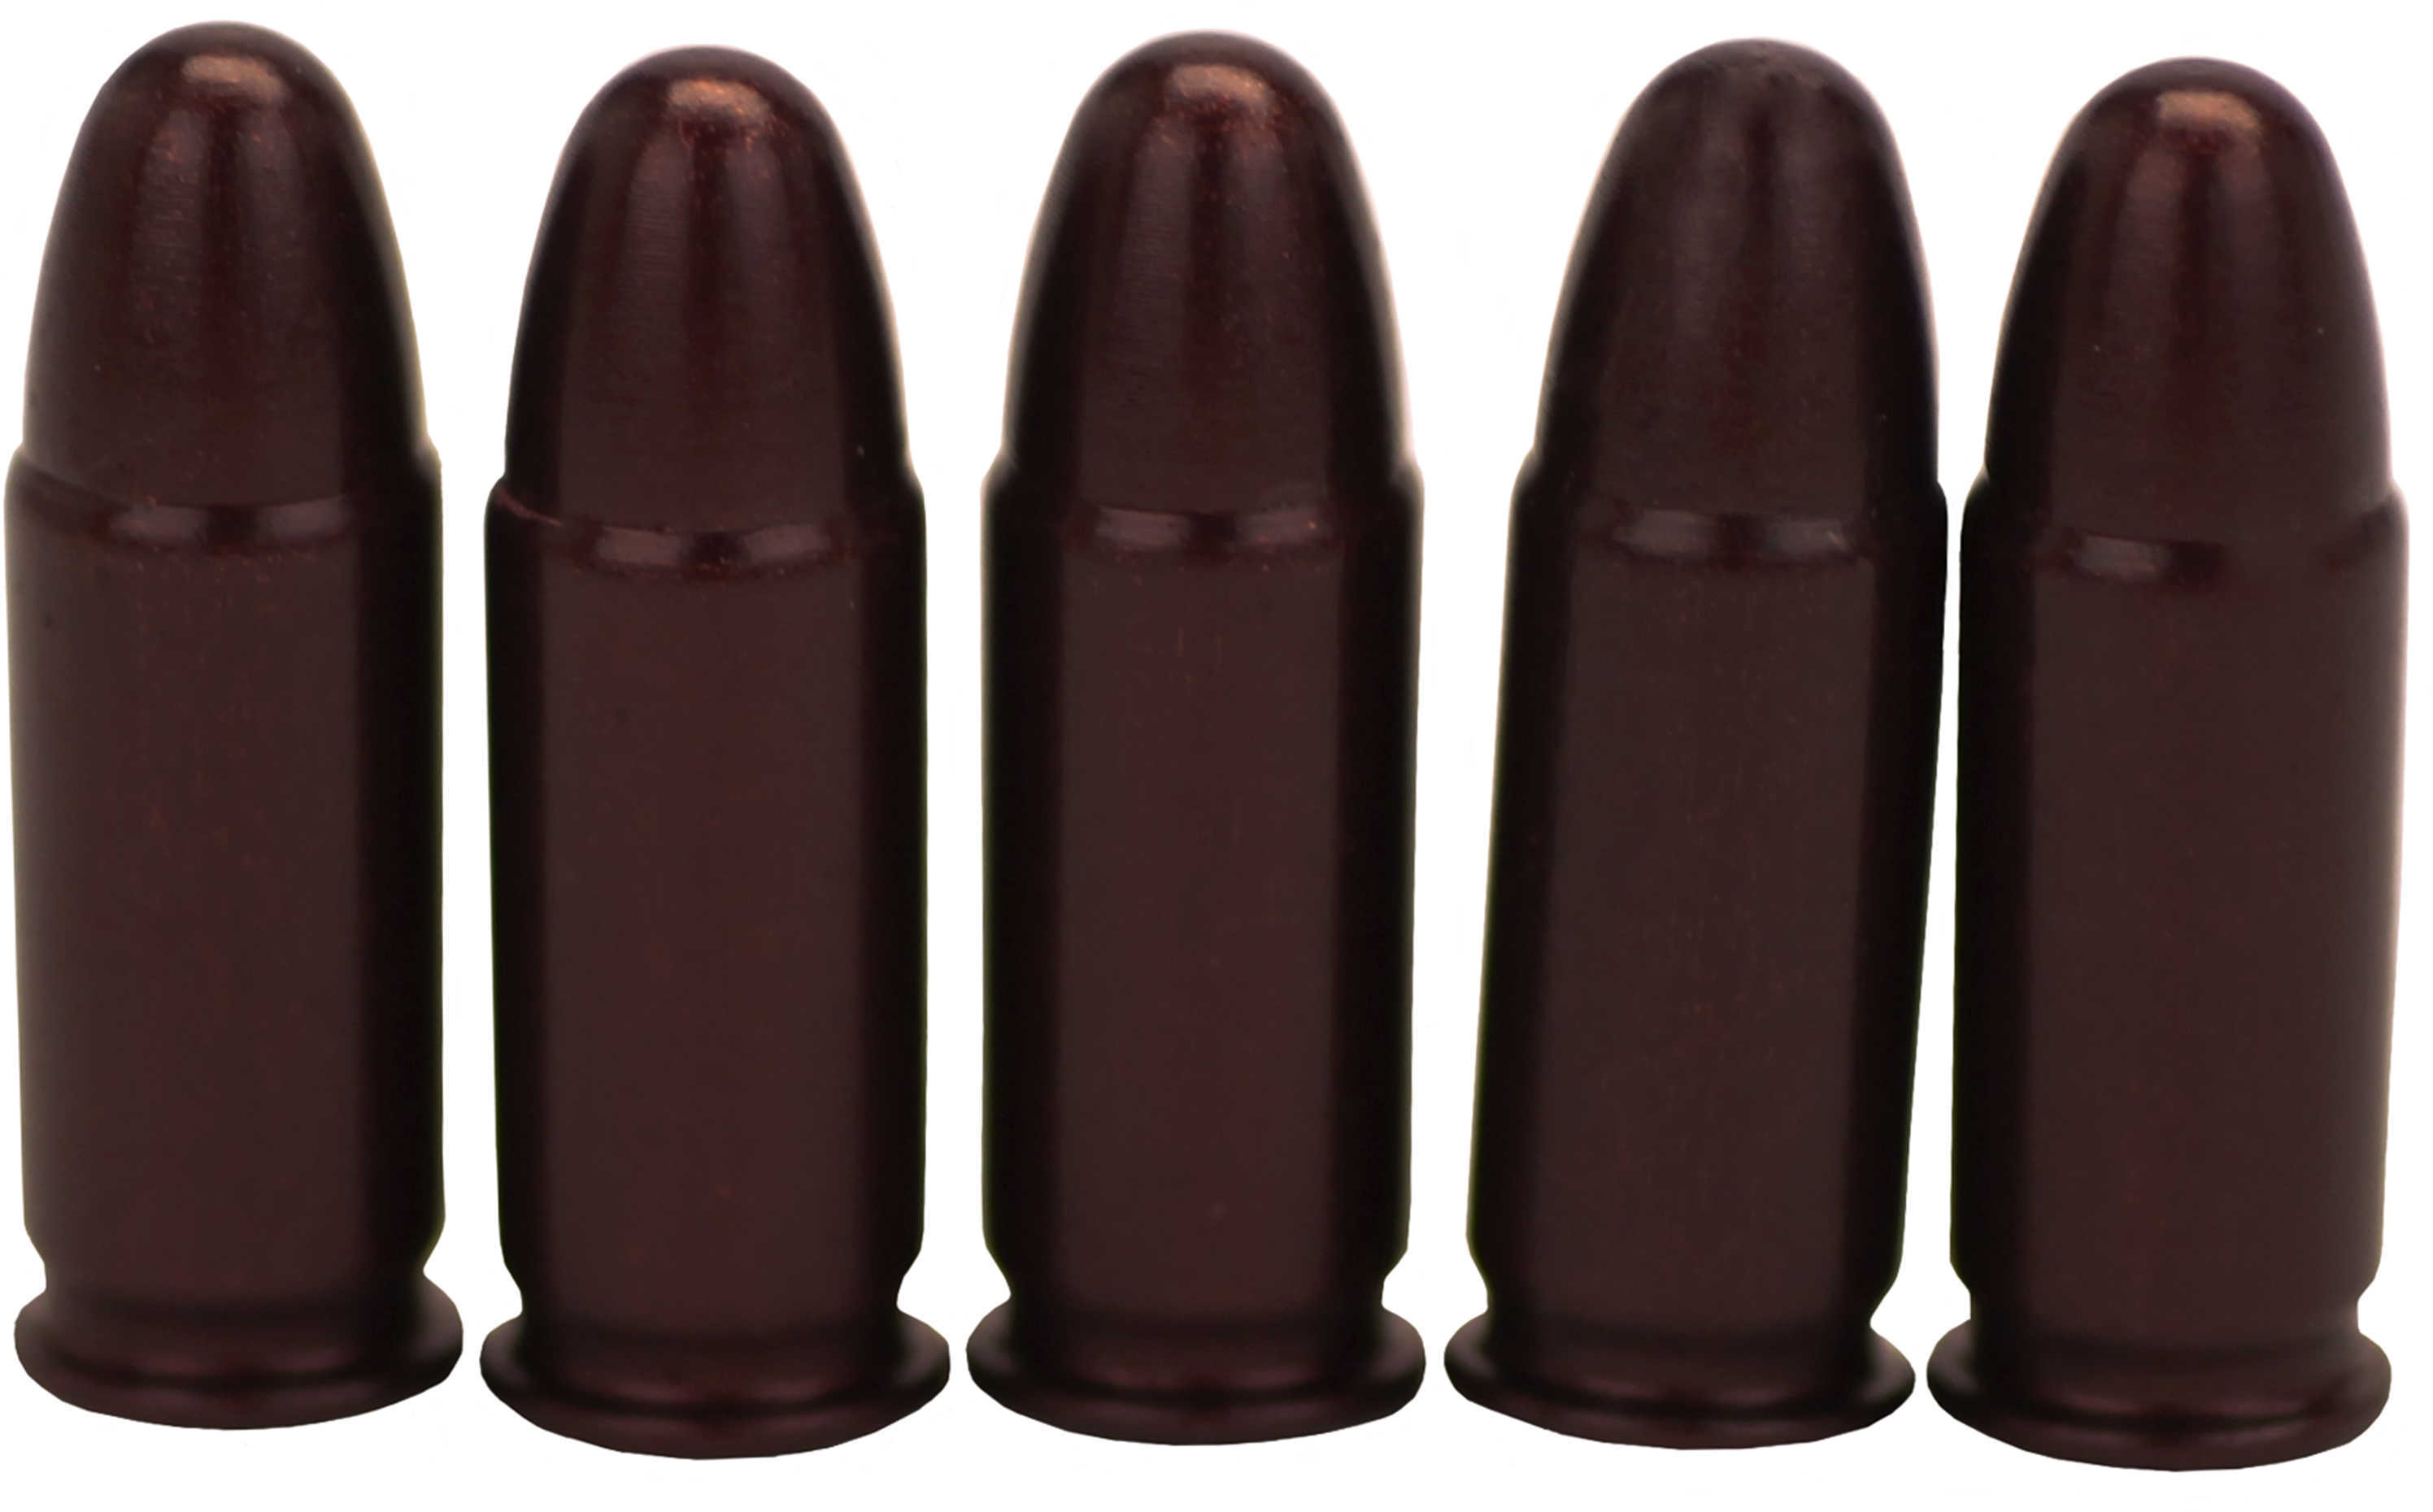 A-Zoom Pachmayr Pistol Metal Snap Caps 25 Auto (Per 5) 15152